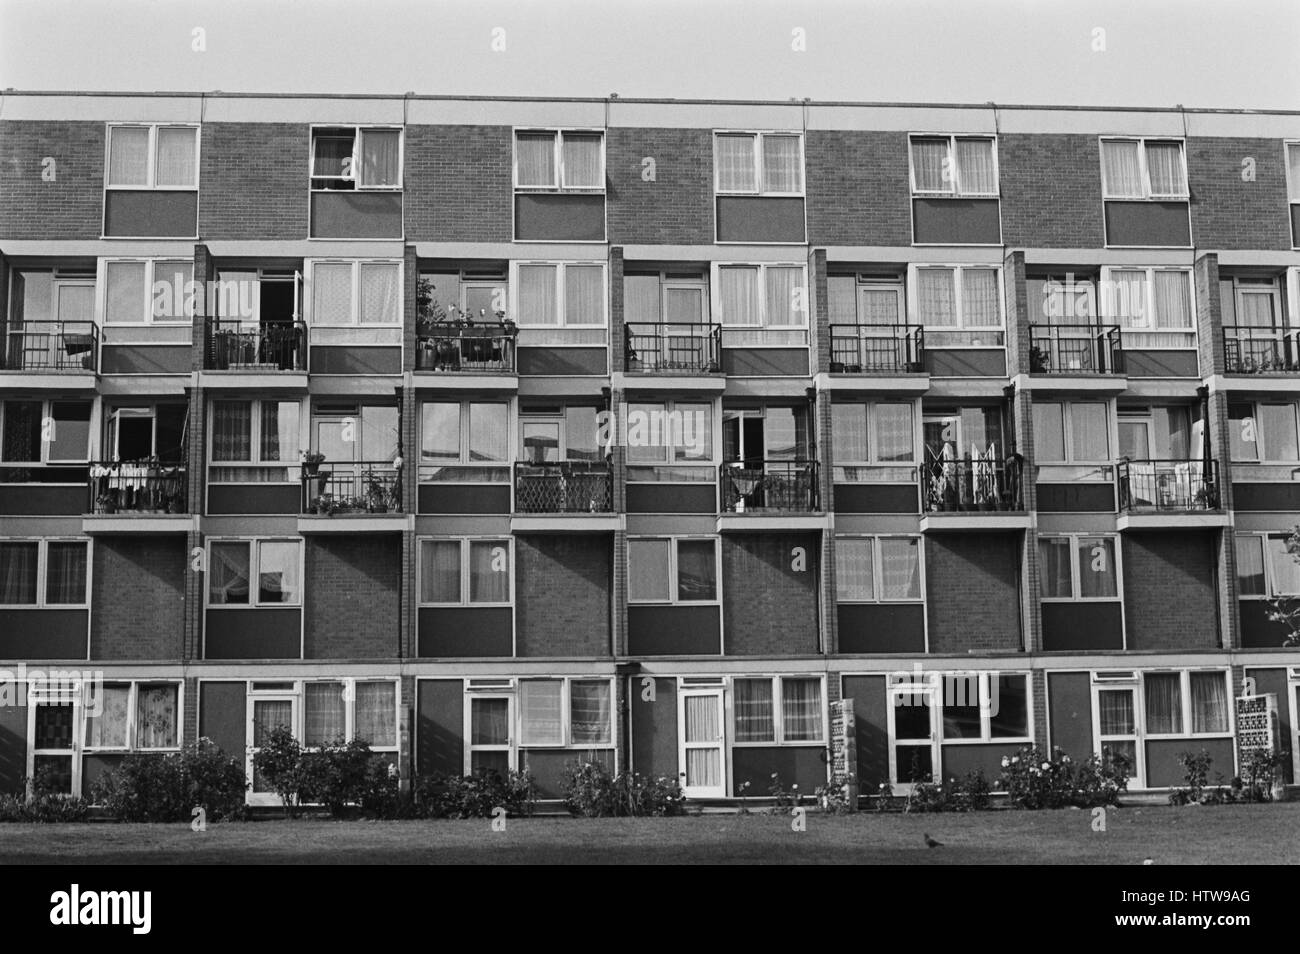 Archive image of a block of council flats, public housing, Lambeth, London, England, 1979 Stock Photo